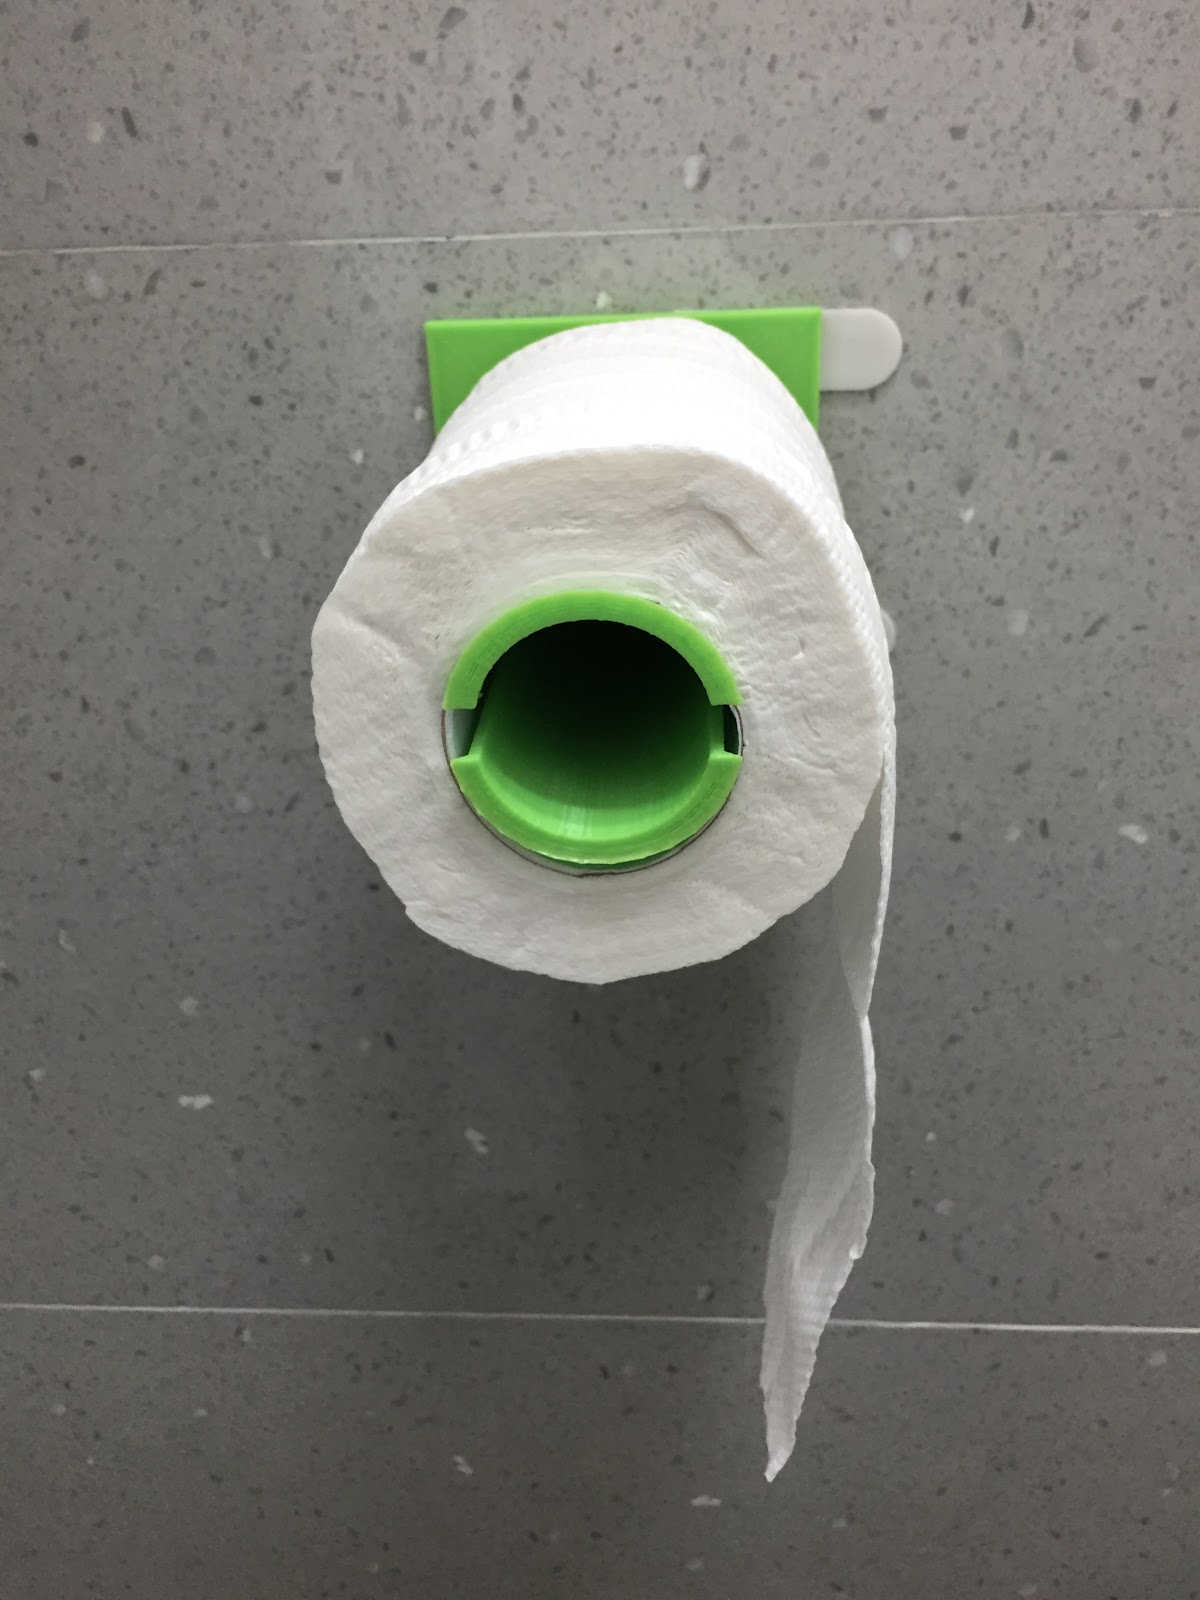 Image of a toilet paper tube holder created using a 3-D printer